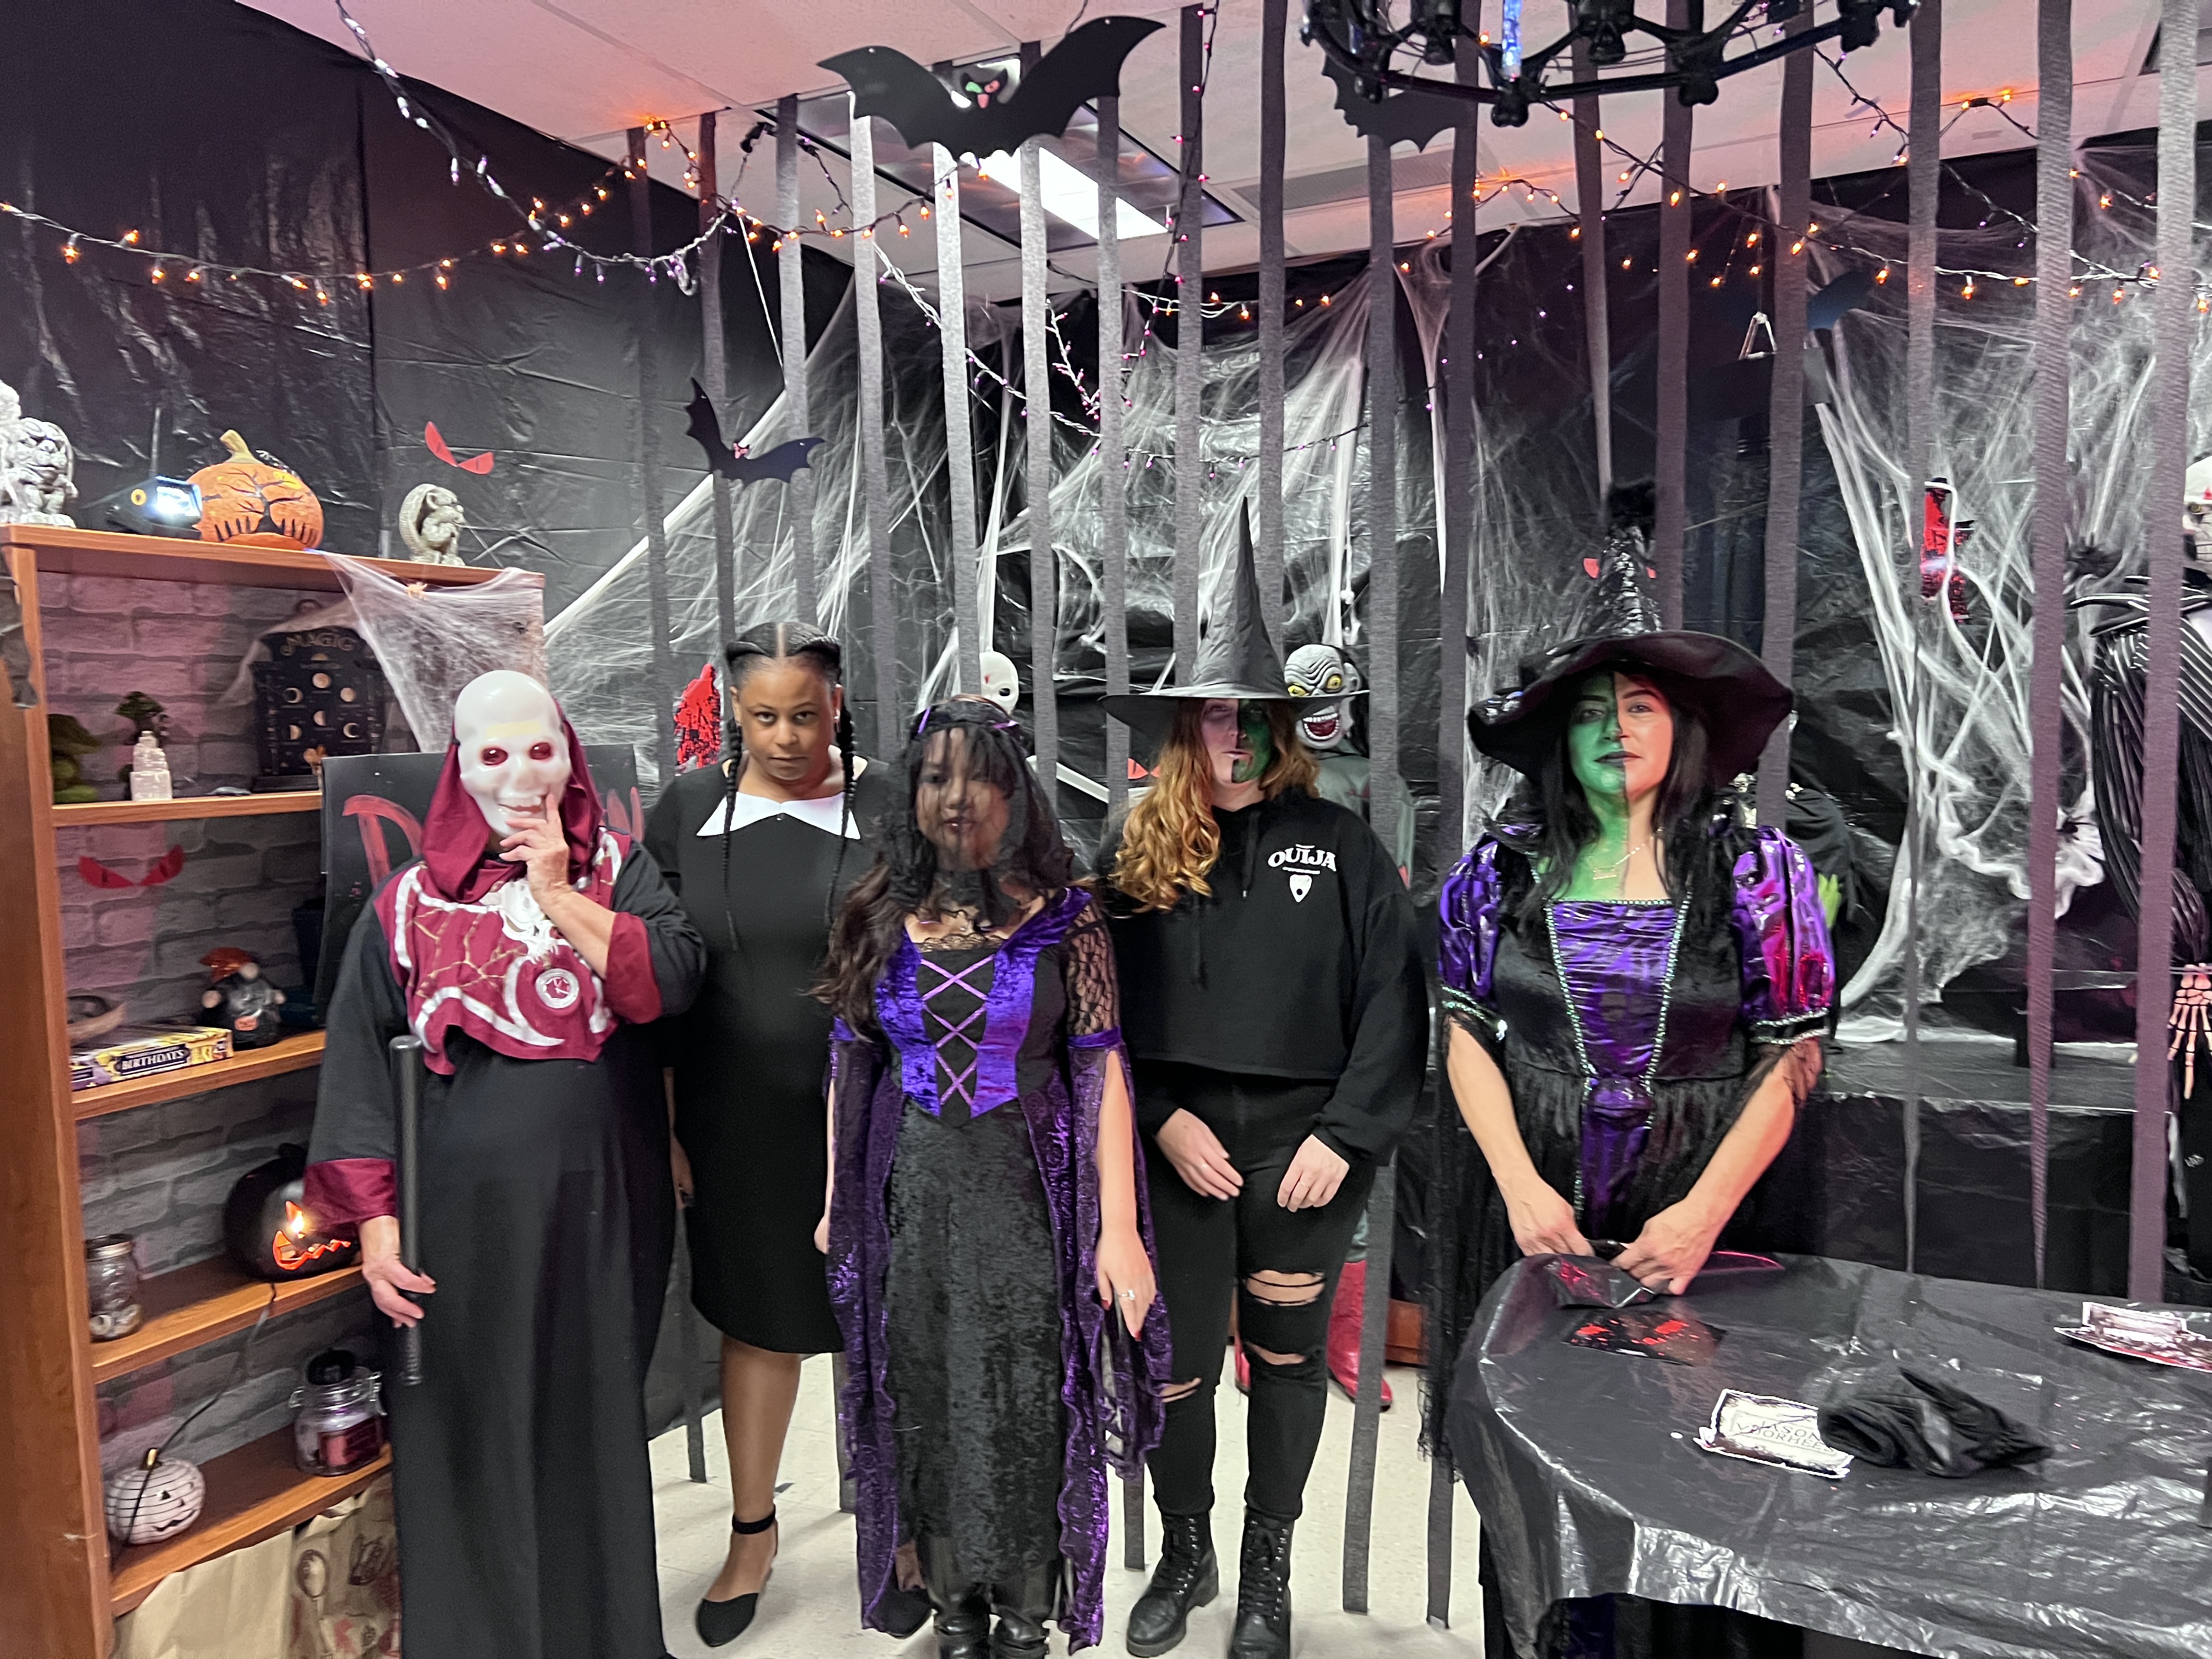 School of Social Work “Social Work Dungeon” group dressed in costumes in front of decorated scary dungeon office